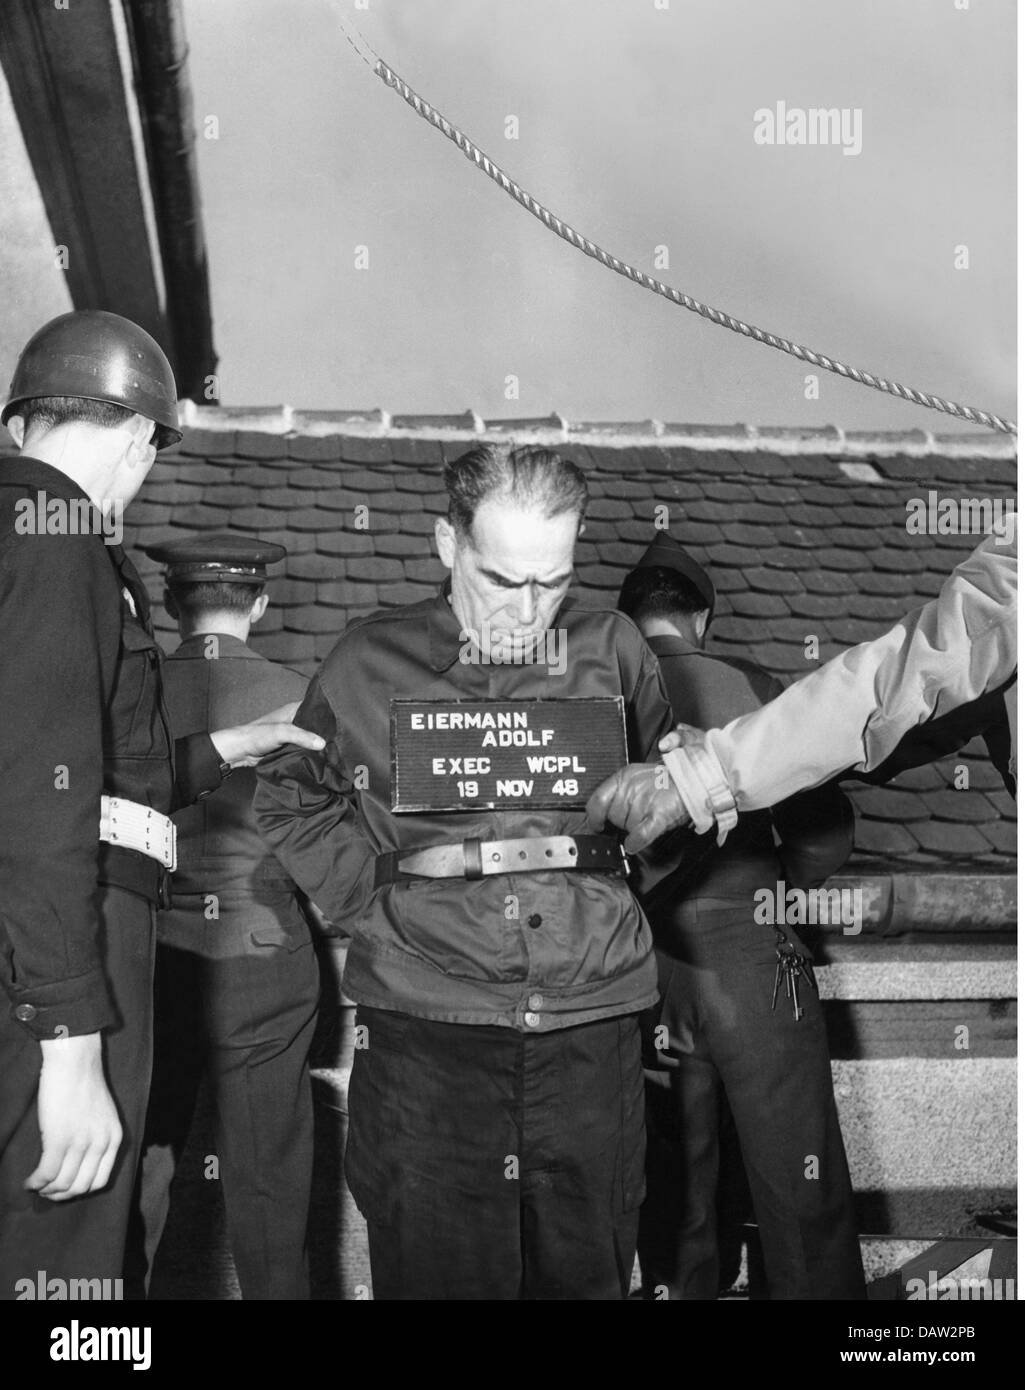 justice, penitentiary system, hanging, execution of Adolf Eiermann, local group leader of Weisenbach, for the assassination of prisoners of war, Landsberg am Lech, 19.11.1948, Additional-Rights-Clearences-Not Available Stock Photo